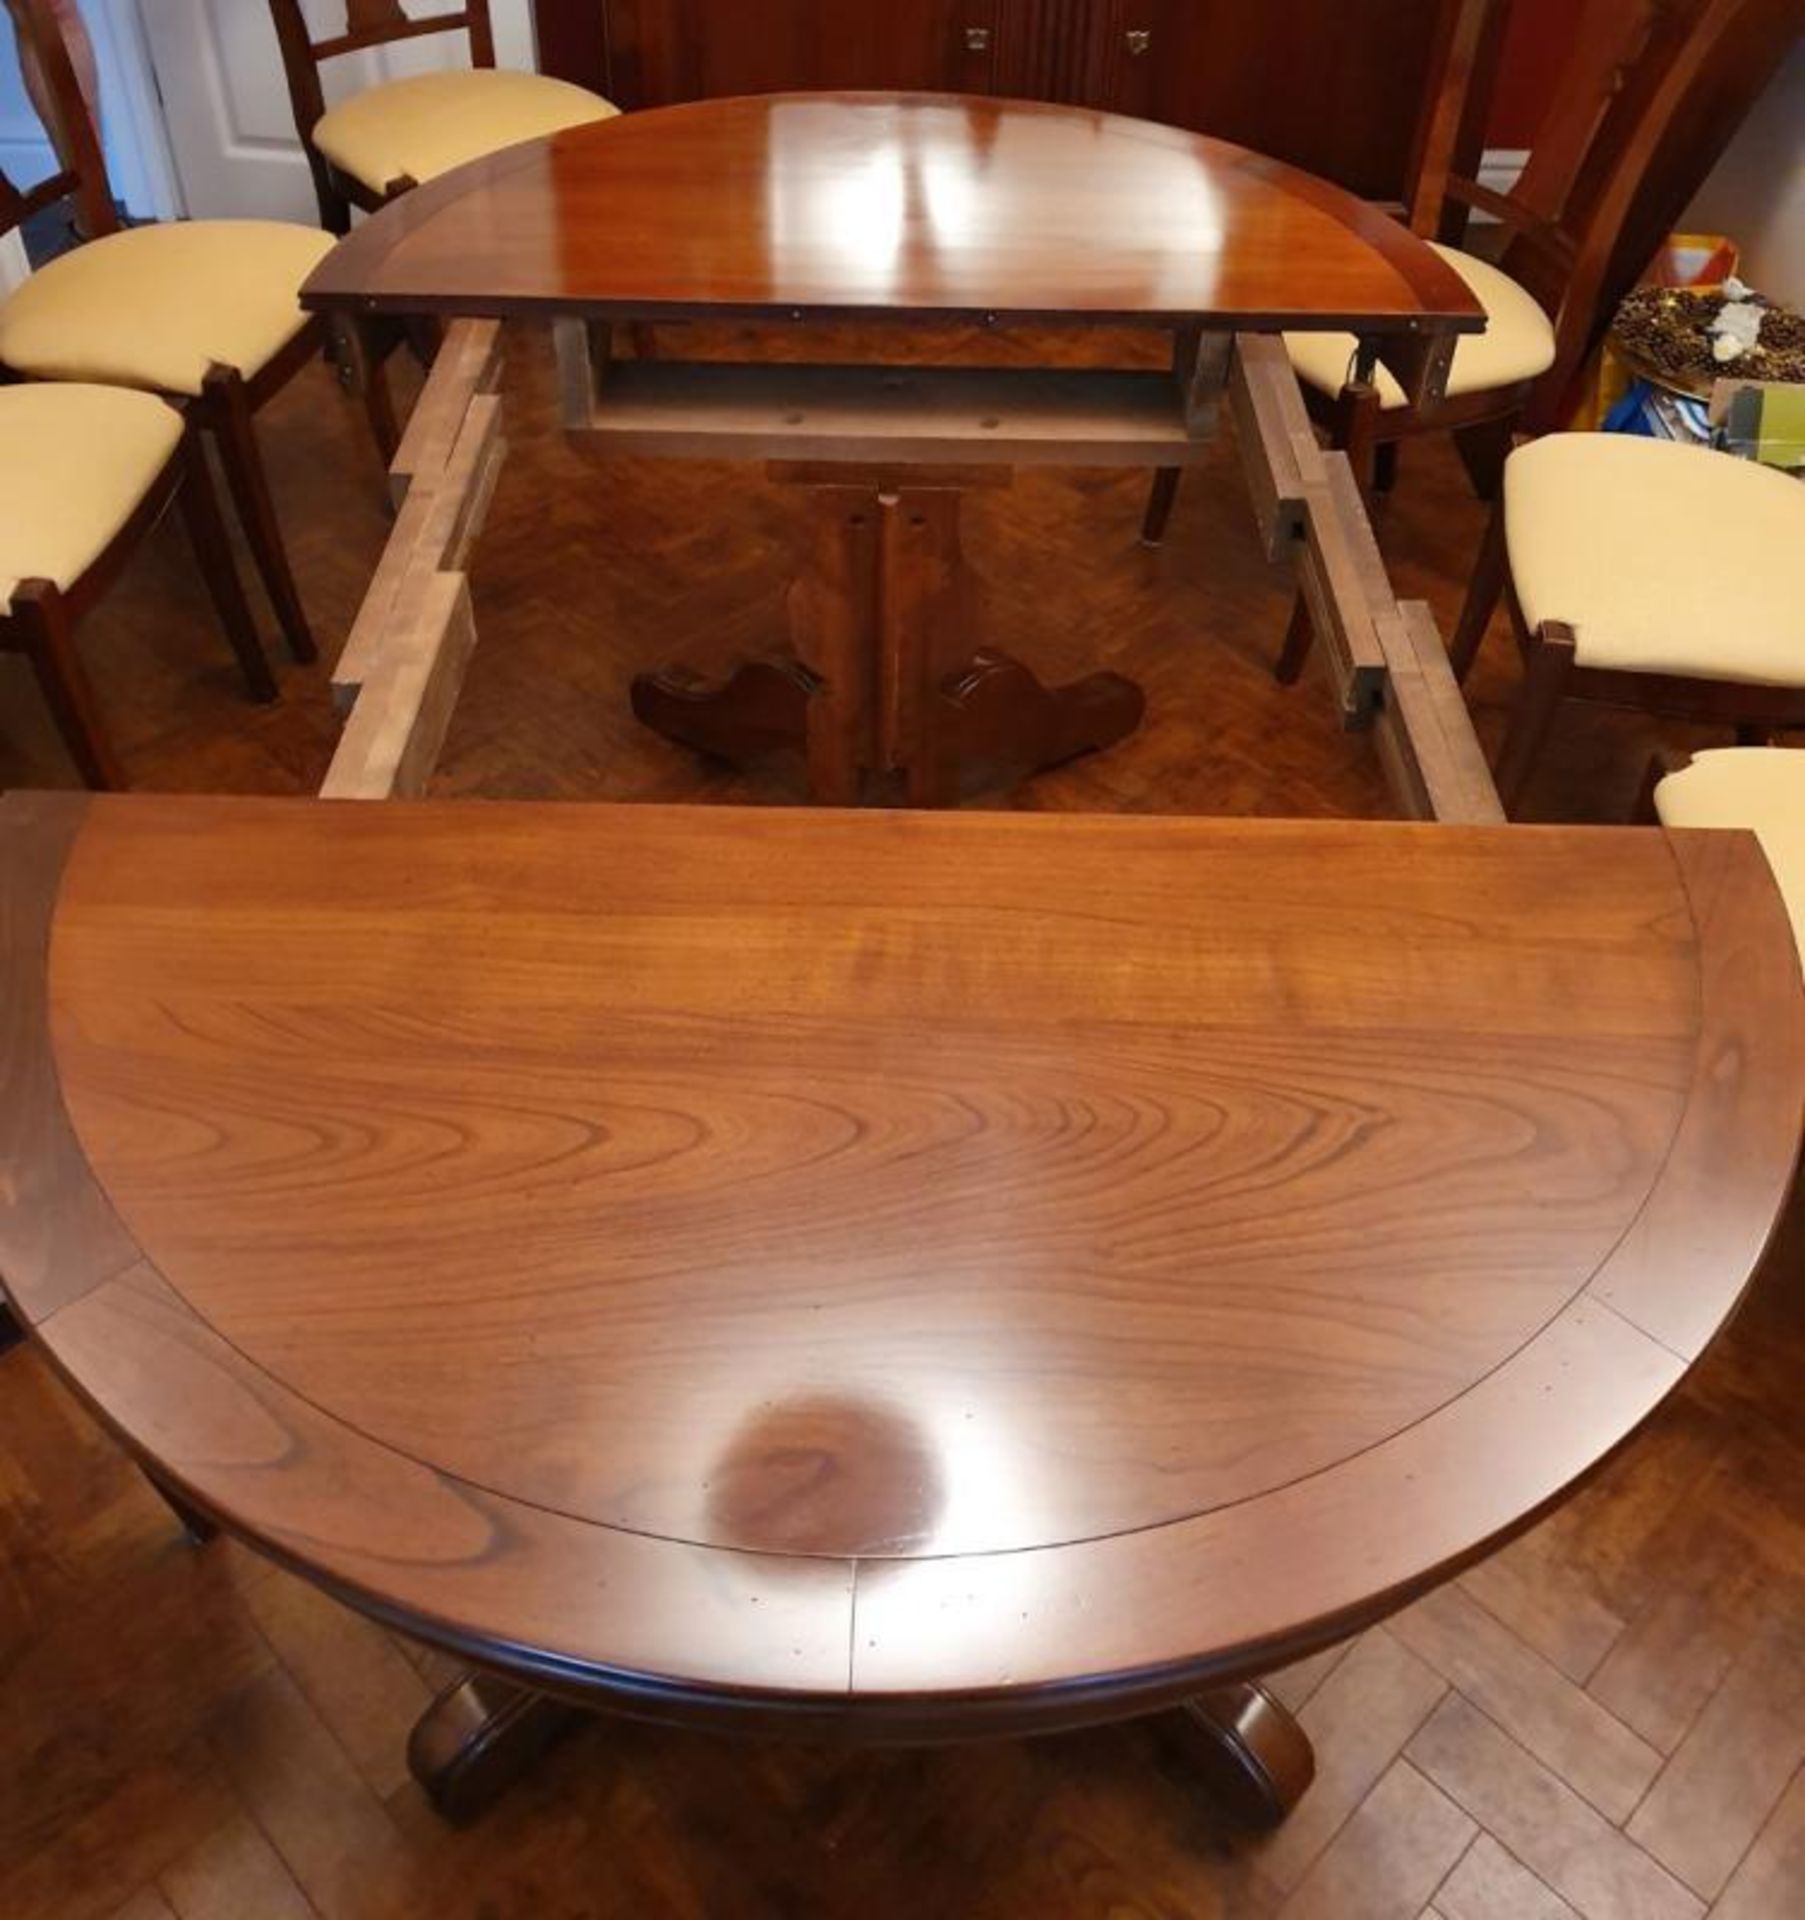 1 x GRANGE Dining Table in Solid Cherry Wood with 8 Matching Chairs - CL473 - Location: Bowdon WA14 - Image 16 of 18